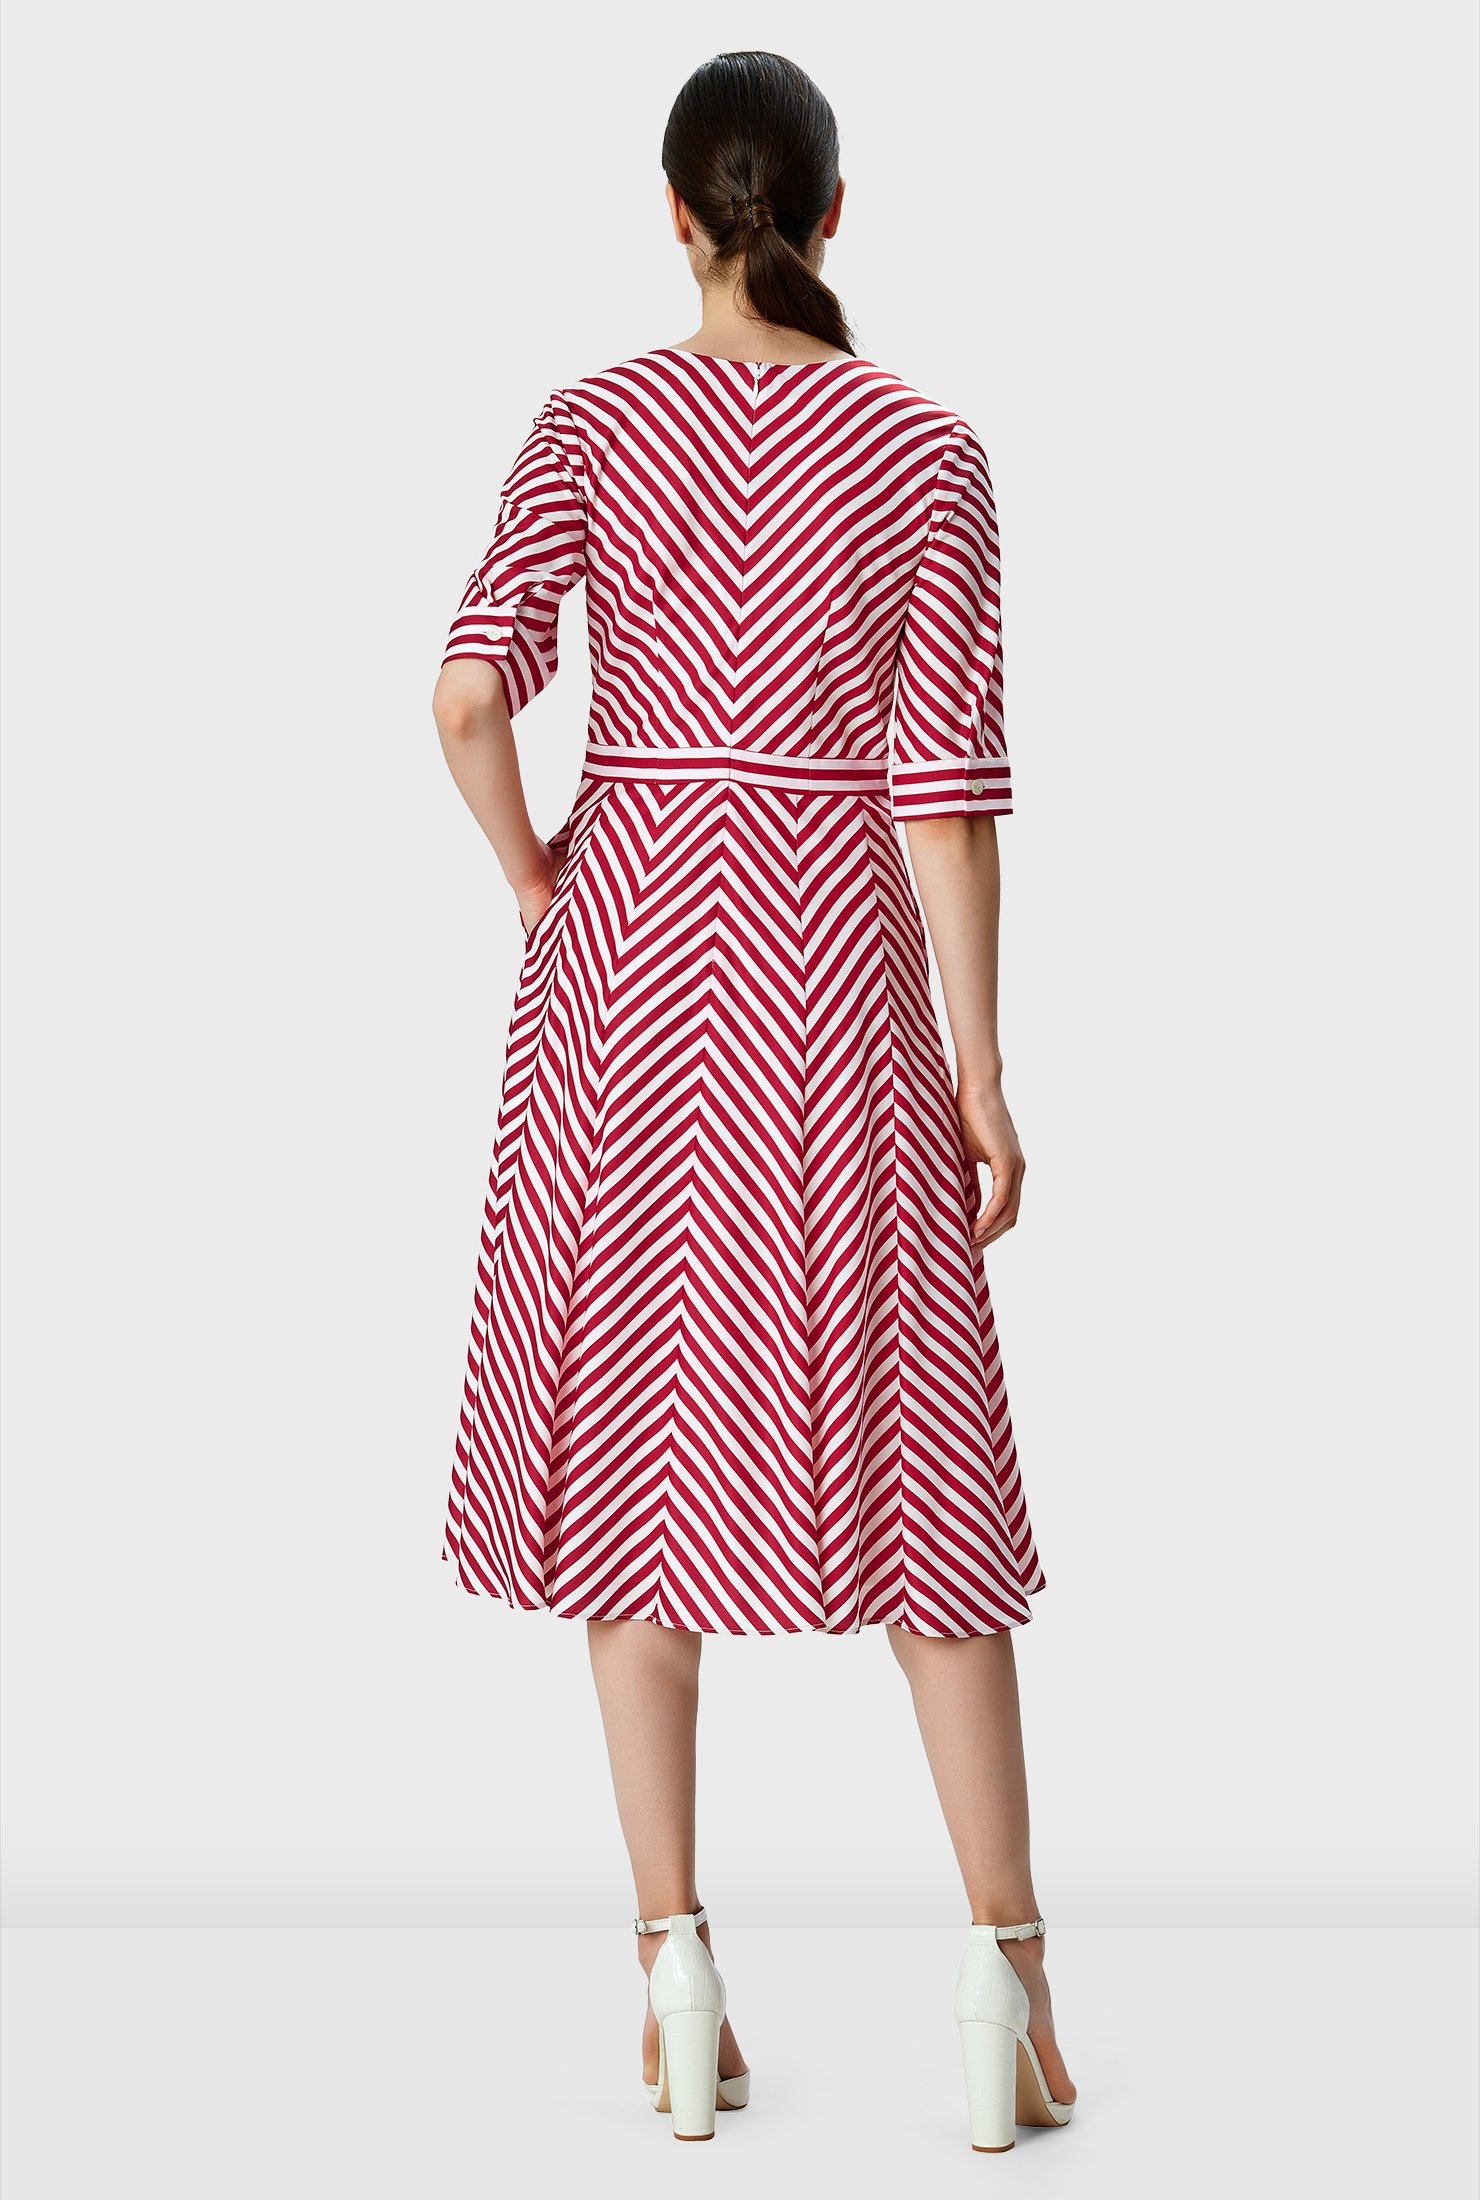 Warm spring days to summer evenings, our breezy multi-directional stripe print crepe dress for an optical illusion effect is styled with an empire bodice that flares out to a chevron stripe skirt.